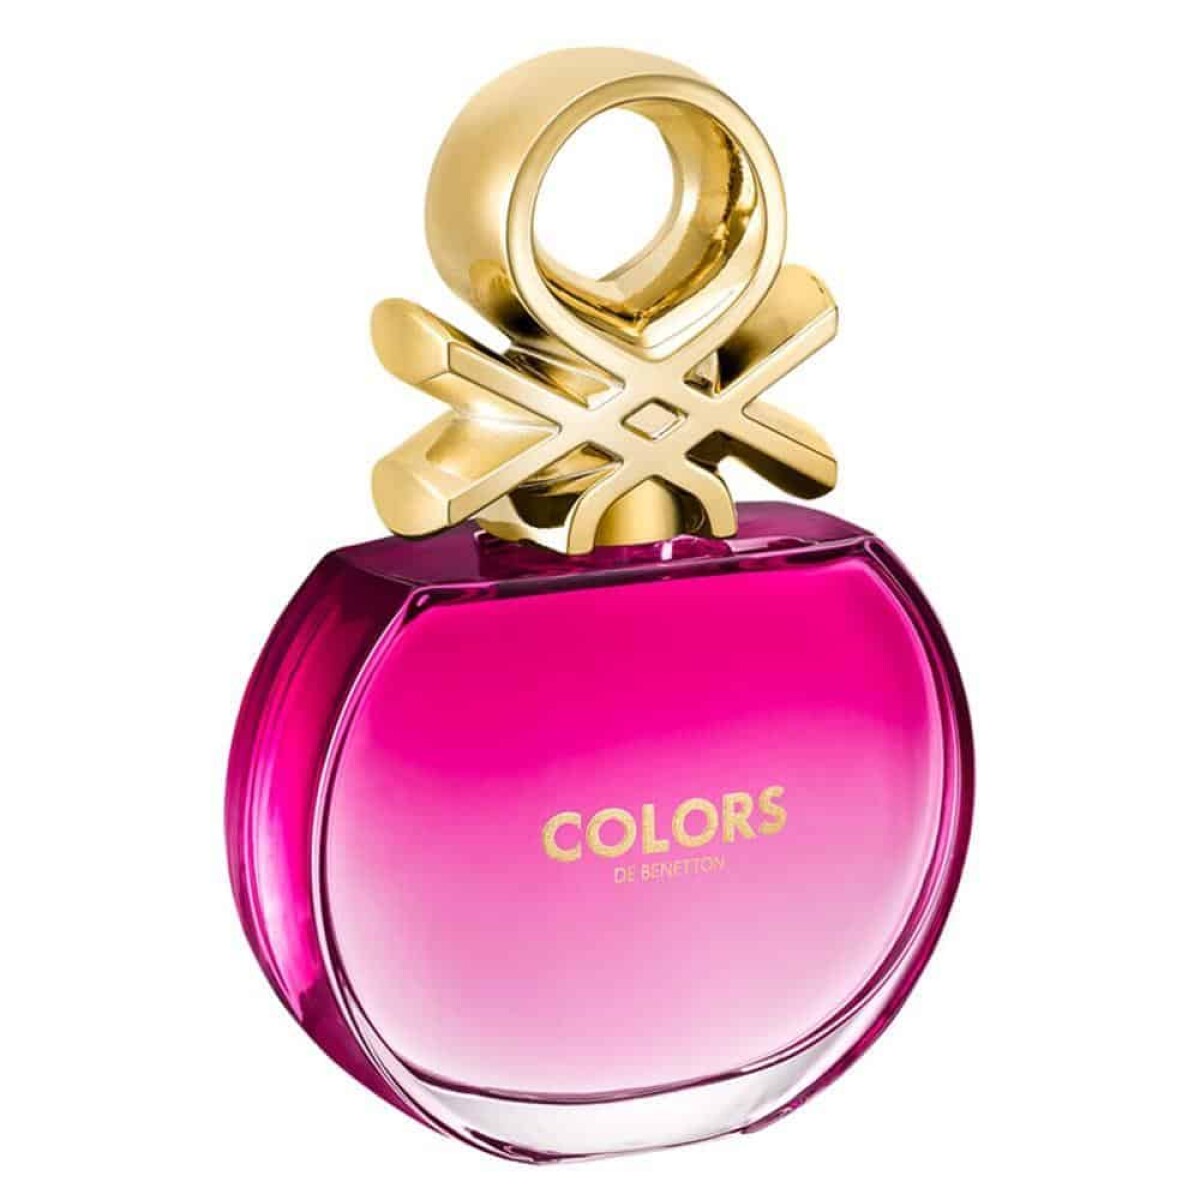 BENETTON COLORS WOMAN PINK EDT 30 ML 